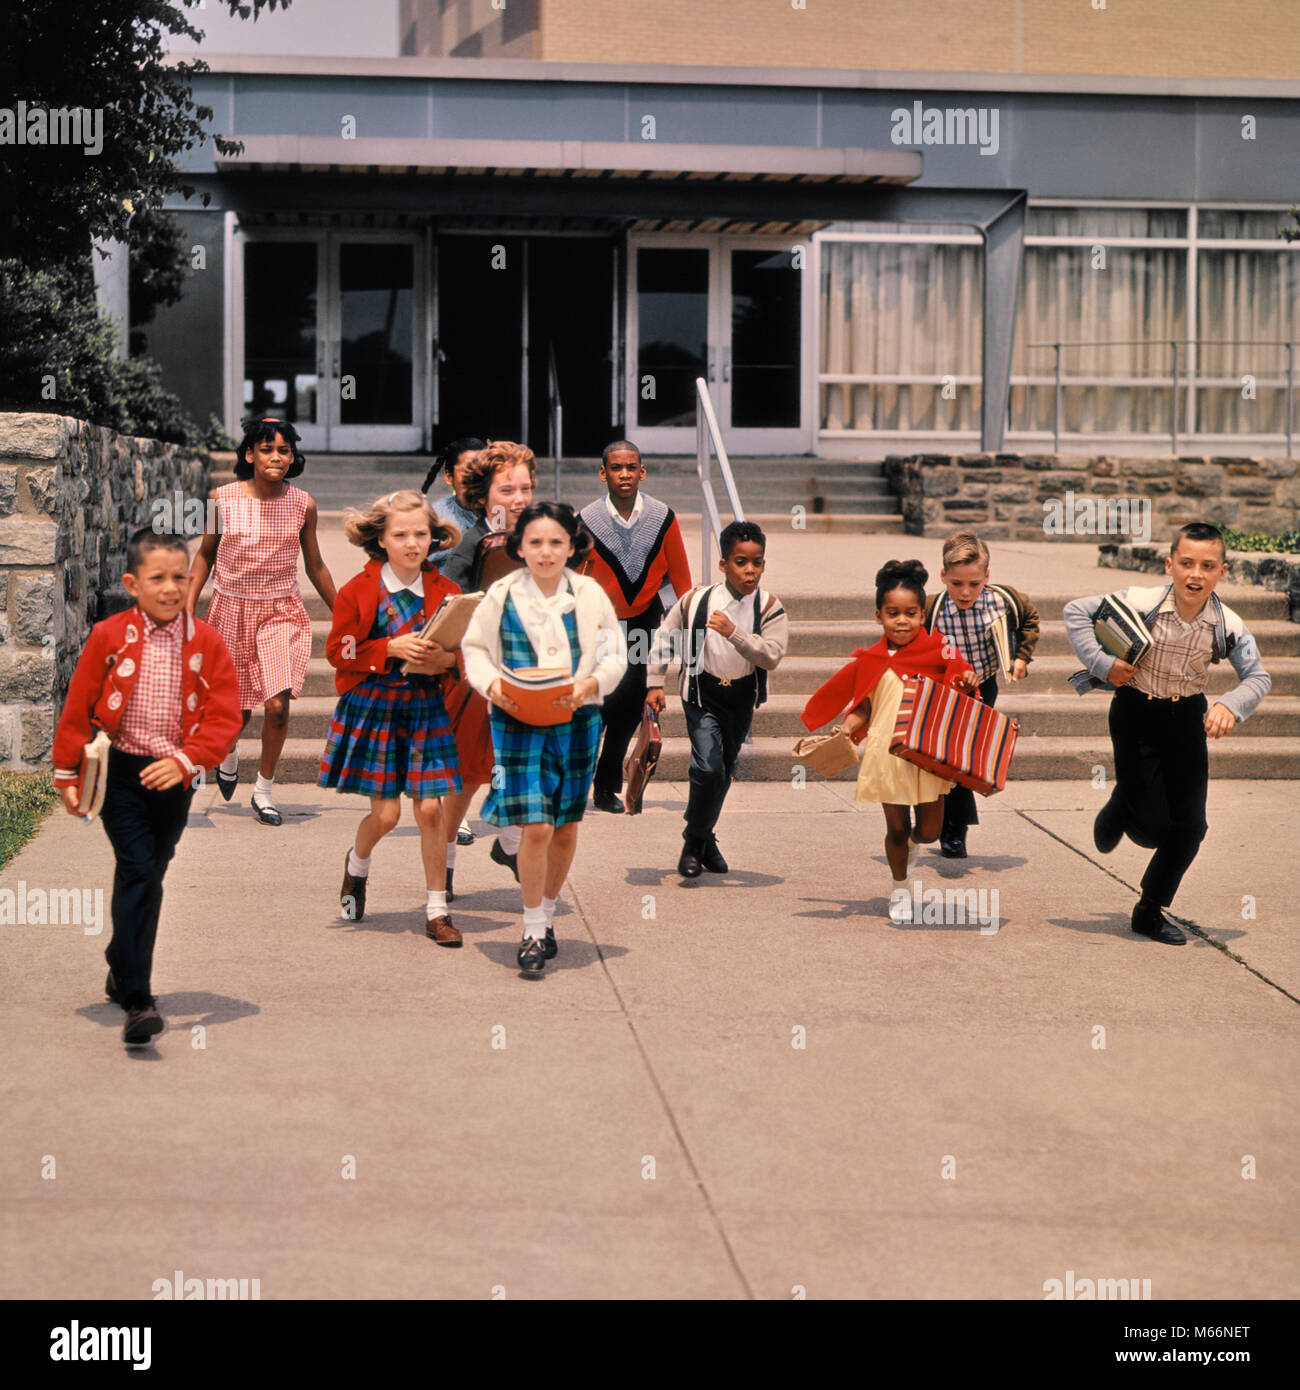 1960s GROUP OF SCHOOL CHILDREN RUNNING DOWN STEPS AWAY FROM SCHOOL BUILDING - ks3096 HAR001 HARS 10-12 YEARS 7-9 YEARS FREEDOM PRETEEN BOY SCHOOLS 5-6 YEARS GRADE AFRICAN-AMERICANS AFRICAN-AMERICAN EXCITEMENT ETHNIC DIVERSITY AFRICAN AMERICANS AFRICAN AMERICAN GROWTH PRIMARY SWEATERS ESCAPE GROUP OF PEOPLE K-12 GRADE SCHOOL JUVENILES MALES PRE-TEEN PRE-TEEN BOY PRE-TEEN GIRL BOOK BAGS CLASSMATES OLD FASHIONED SCHOOL’S OUT Stock Photo